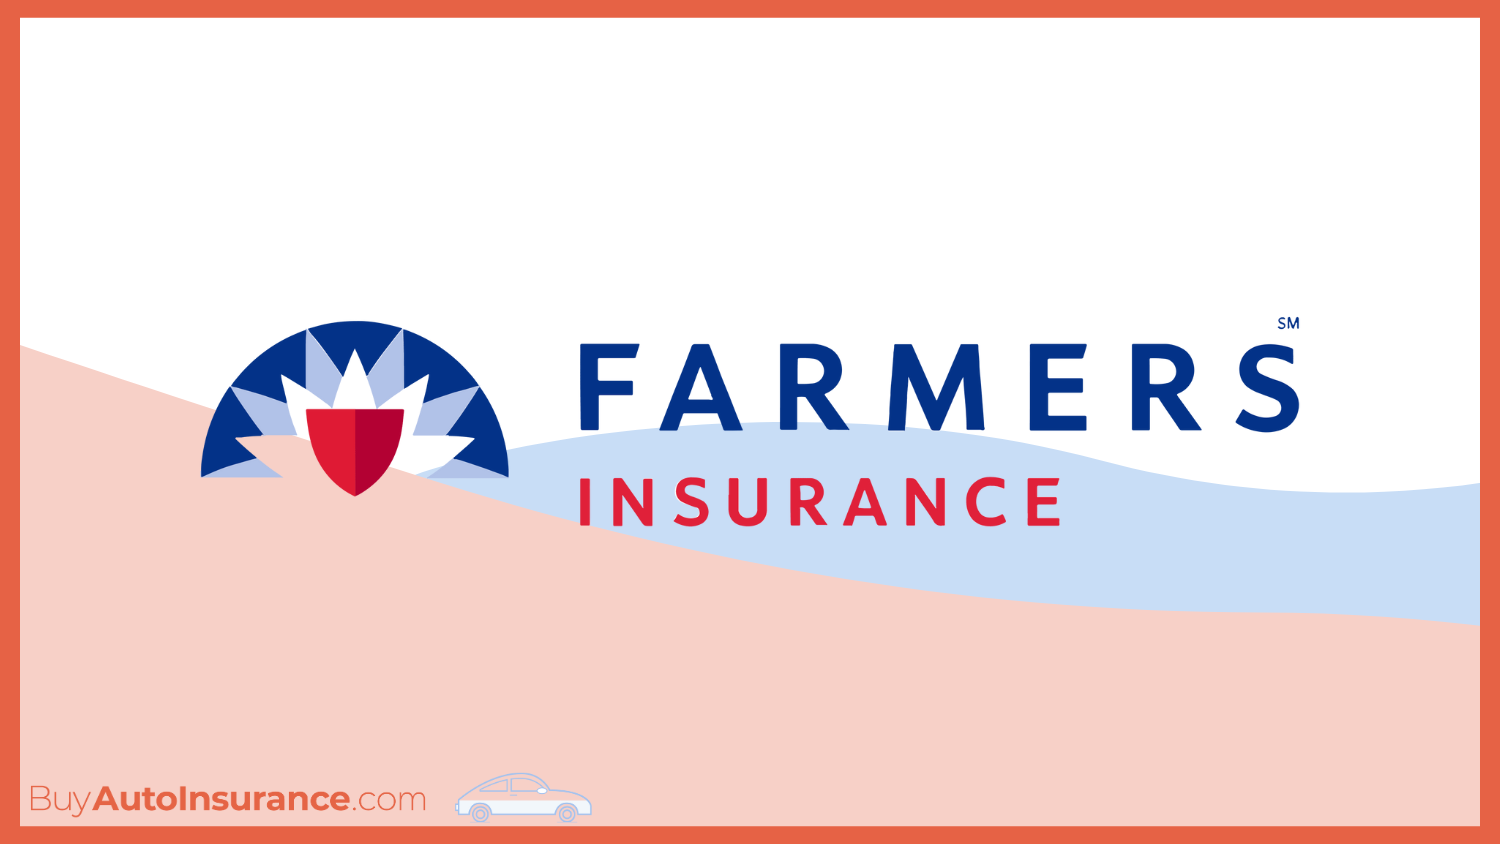 Cheap Auto Insurance Companies That Don't Monitor Your Driving: Farmers